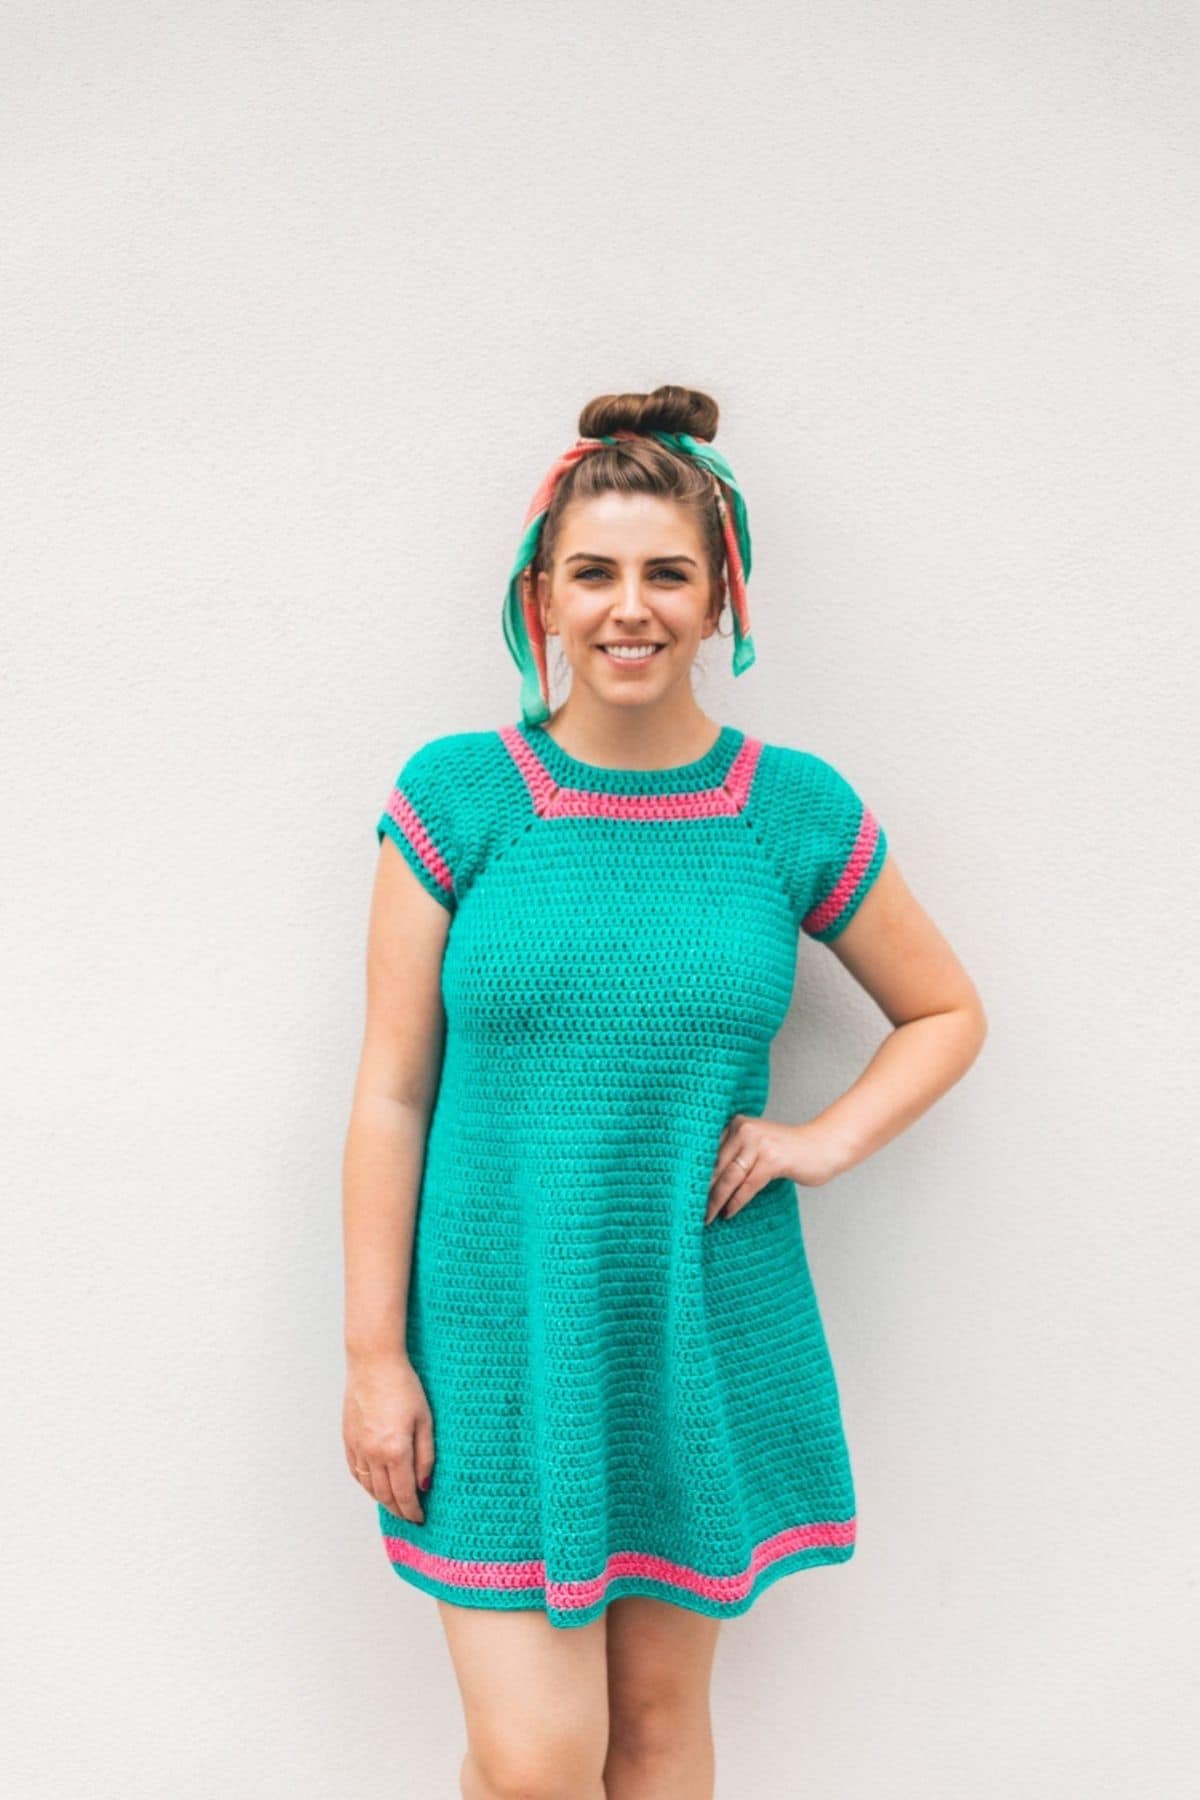 Woman in teal crochet dress against white wall